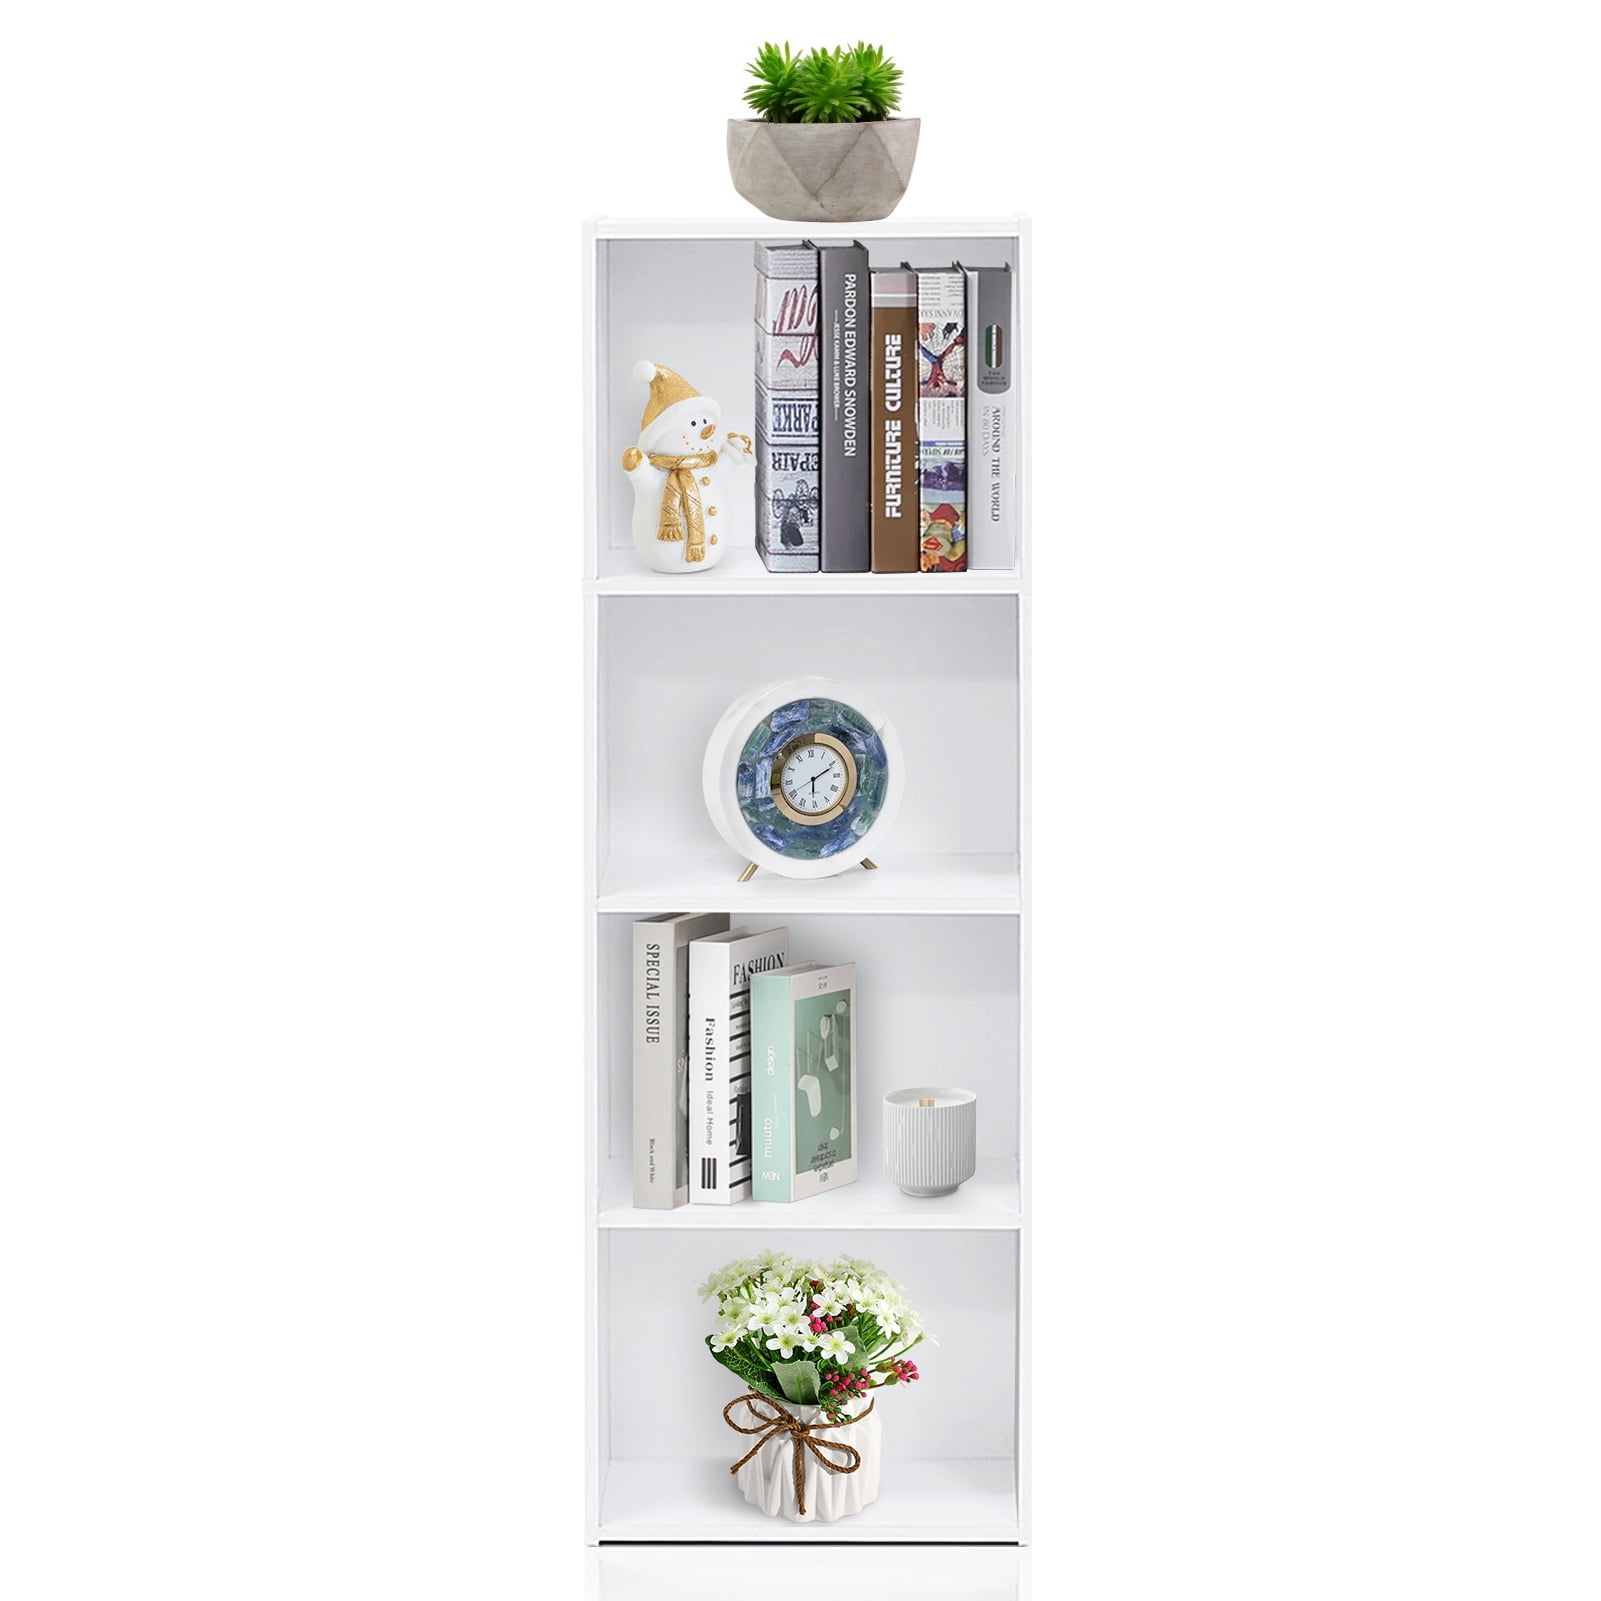 23.6 × 11.8 × 36.2 Inch 4 Tiers Floor Standing Bookshelf Rack 2 Cube Unit with Drawers for Home Office Display Storage W × D × H White ALSC ASUUNY Small Bookcase 